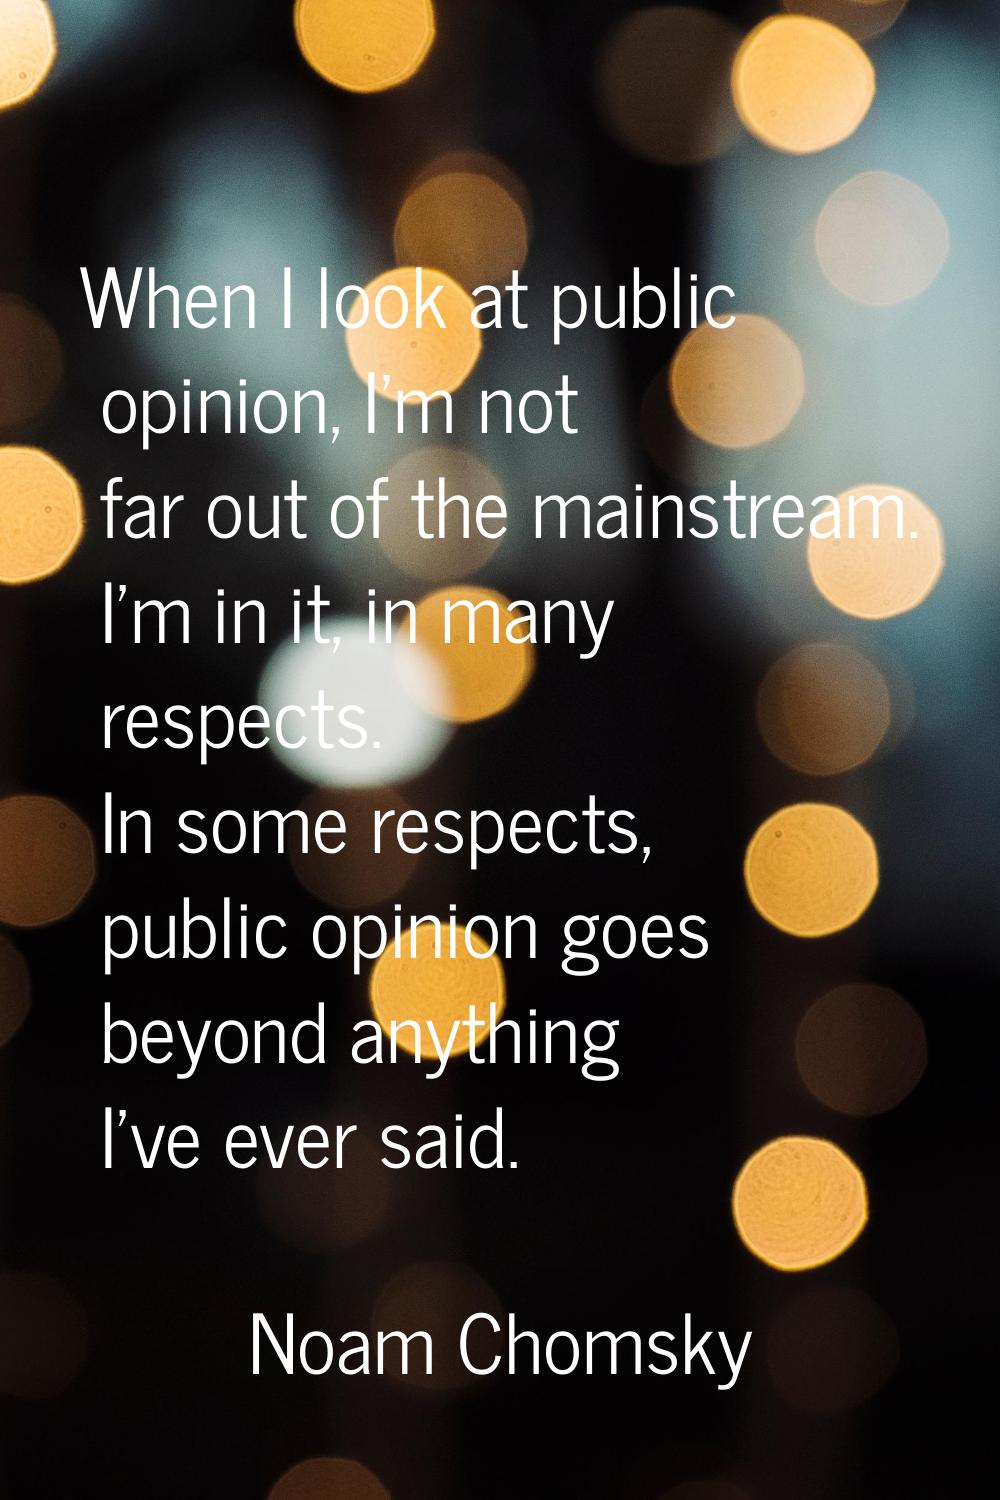 When I look at public opinion, I'm not far out of the mainstream. I'm in it, in many respects. In s